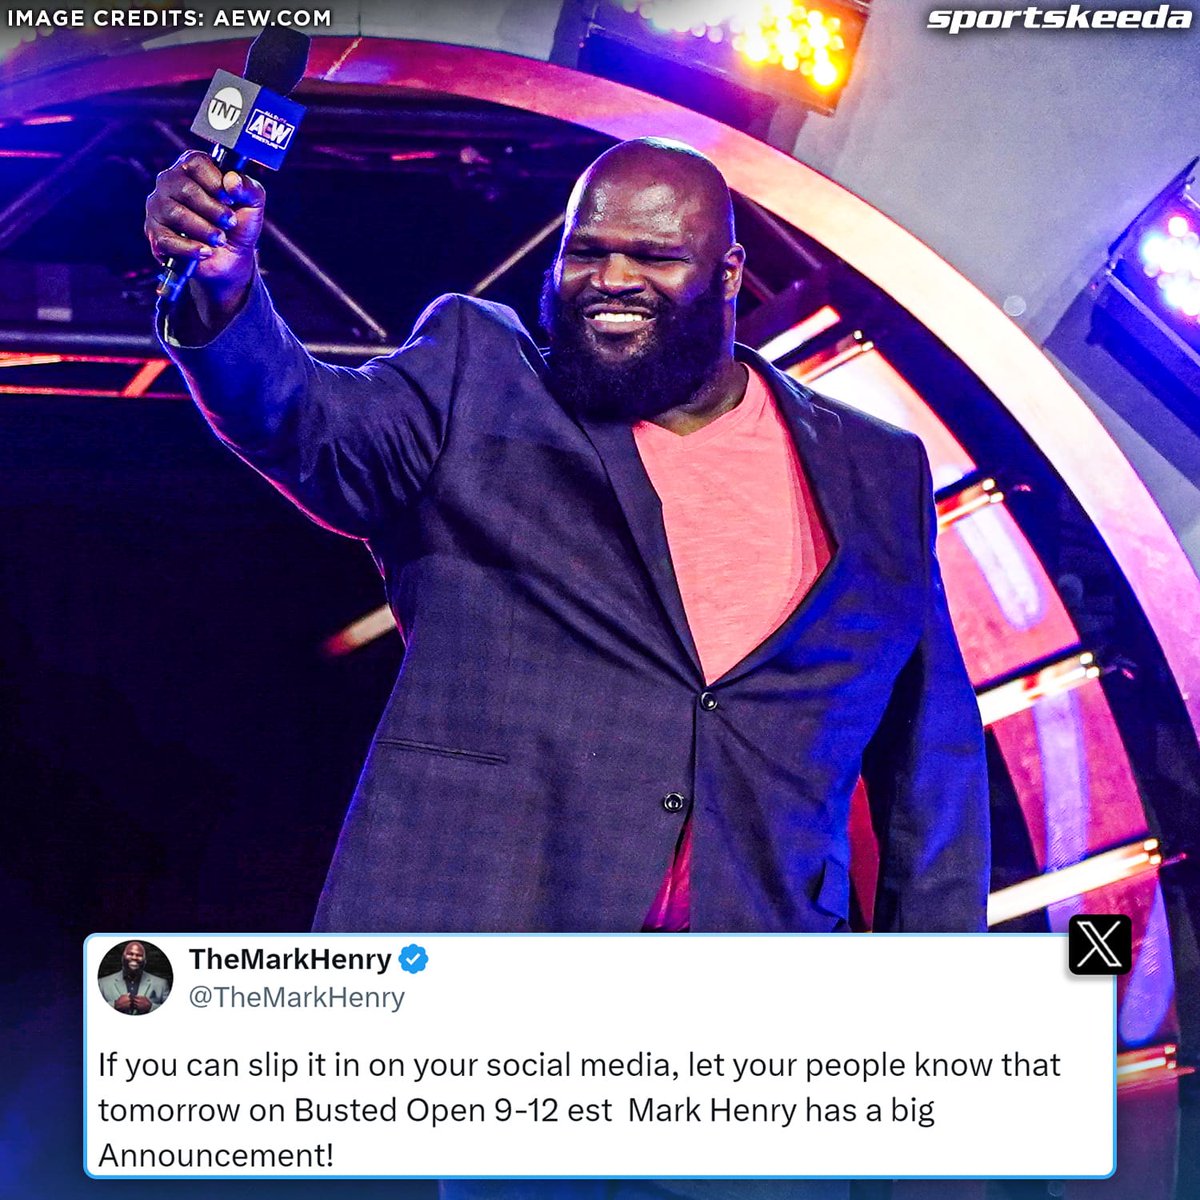 #MarkHenry has an announcement to make! 👀 #AEW